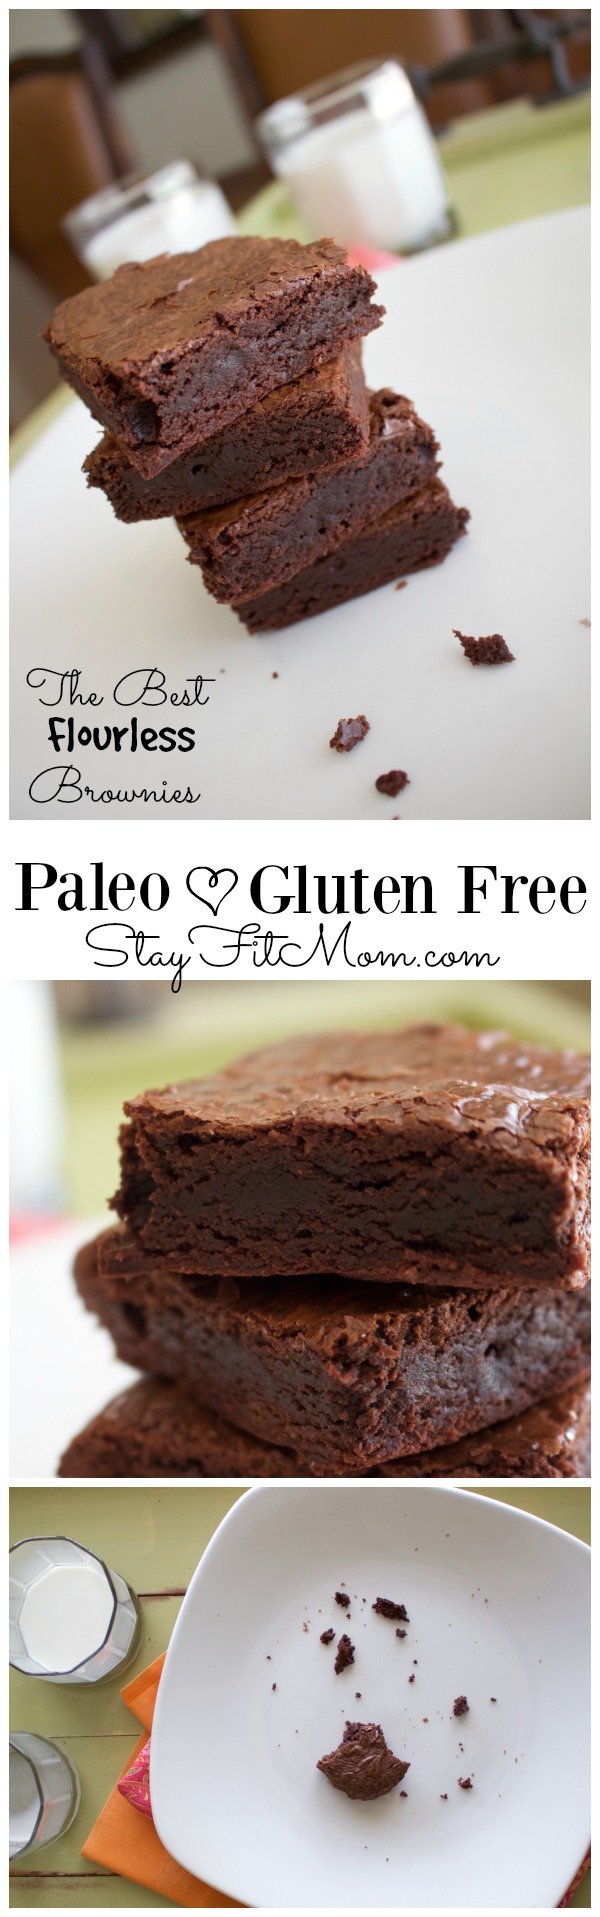 These are the perfect mix of soft and chewy. I LOVE these Paleo Brownies!